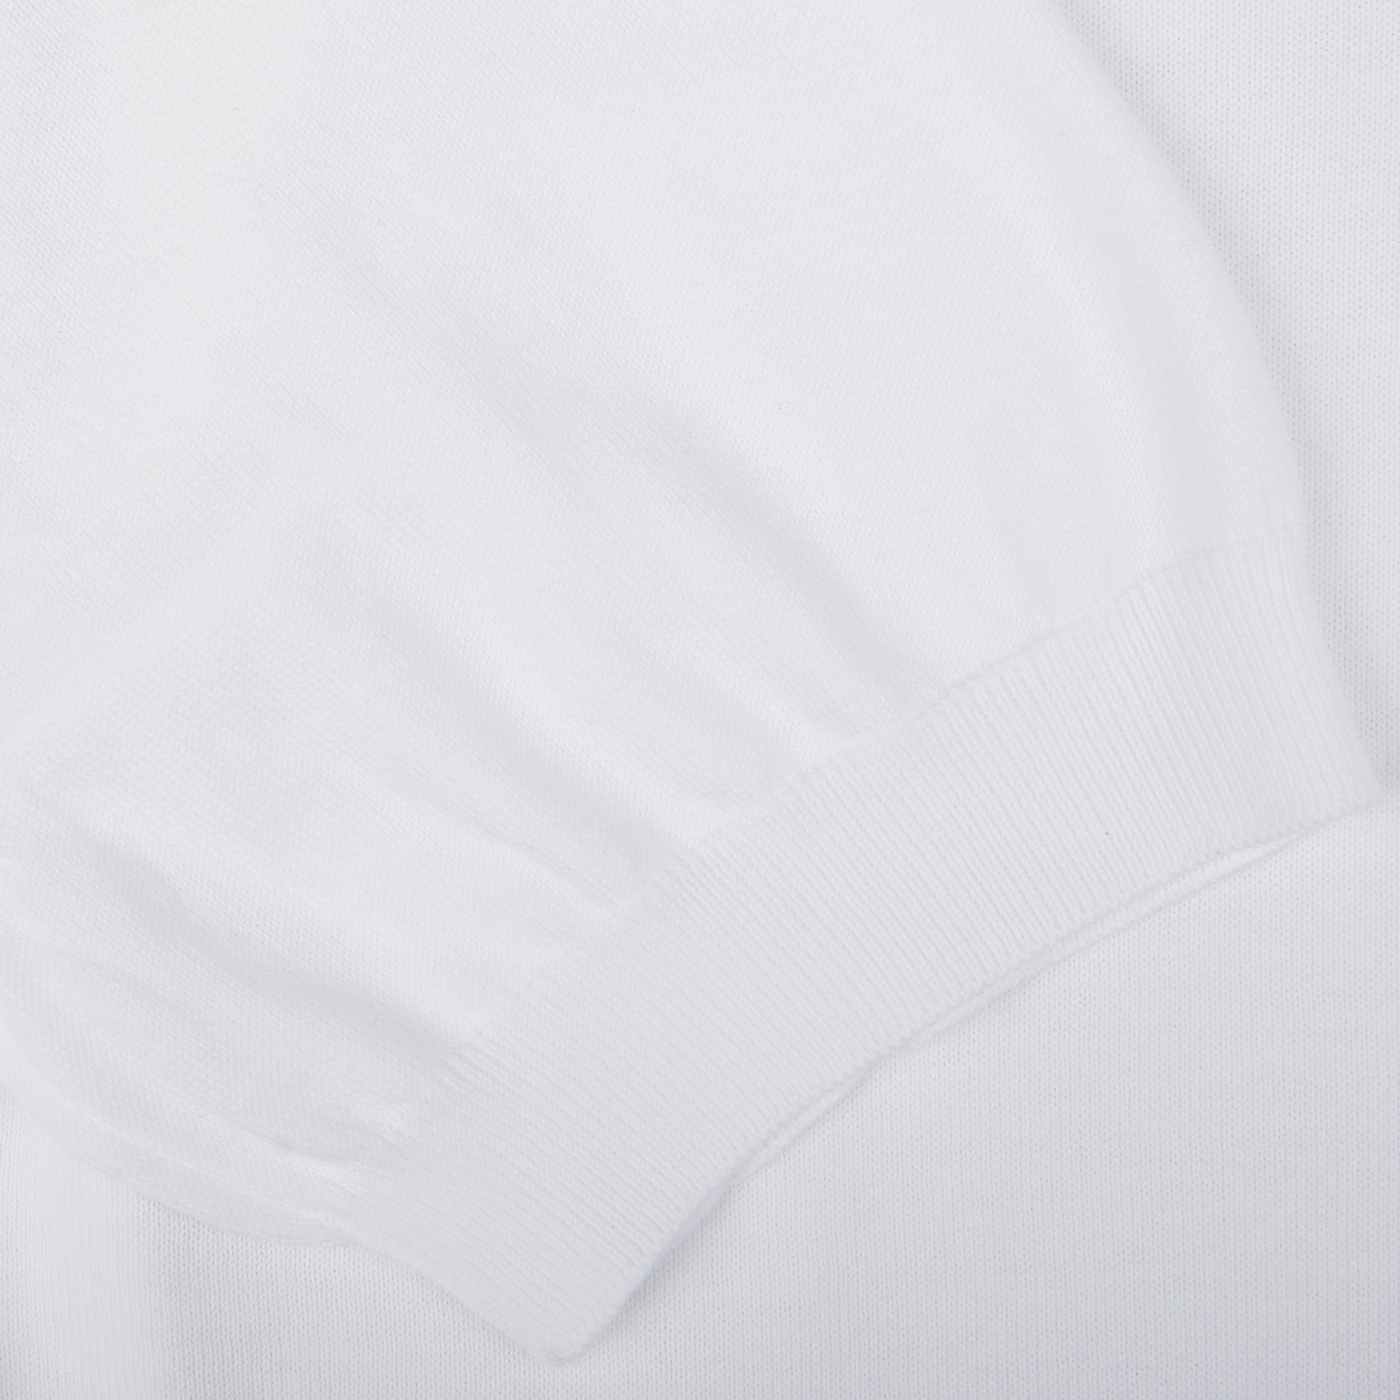 Close-up view of a white, ribbed fabric texture, likely a part of a Gran Sasso White Organic Cotton T-shirt.